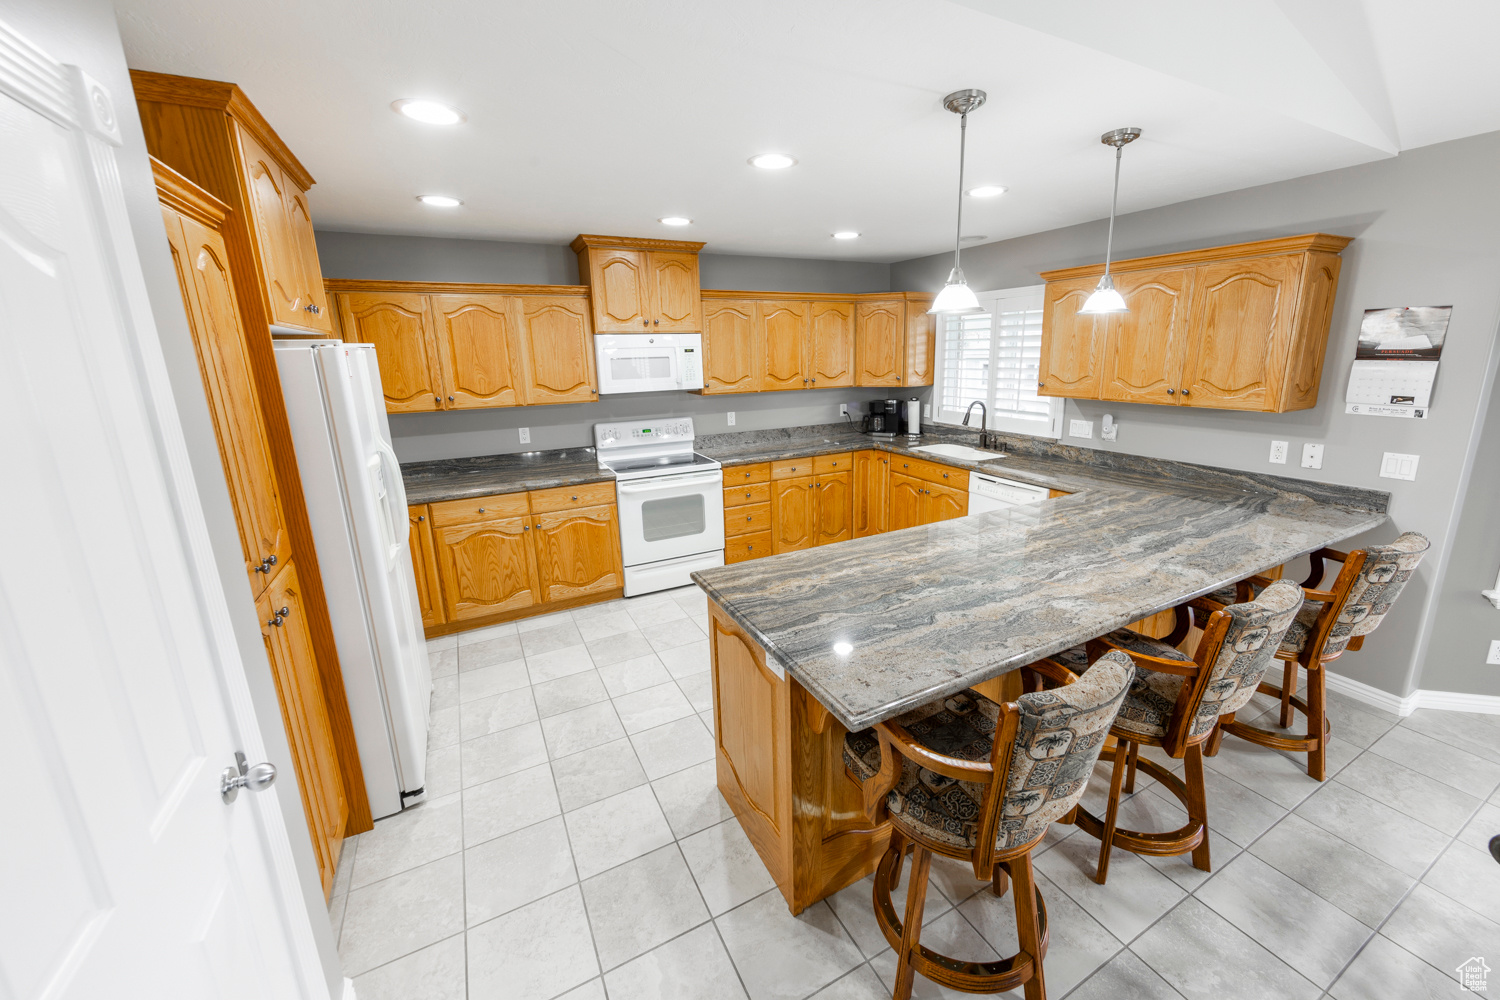 Kitchen featuring pendant lighting, white appliances, light tile flooring, a kitchen bar, gorgeous granite counters, and  a double sink